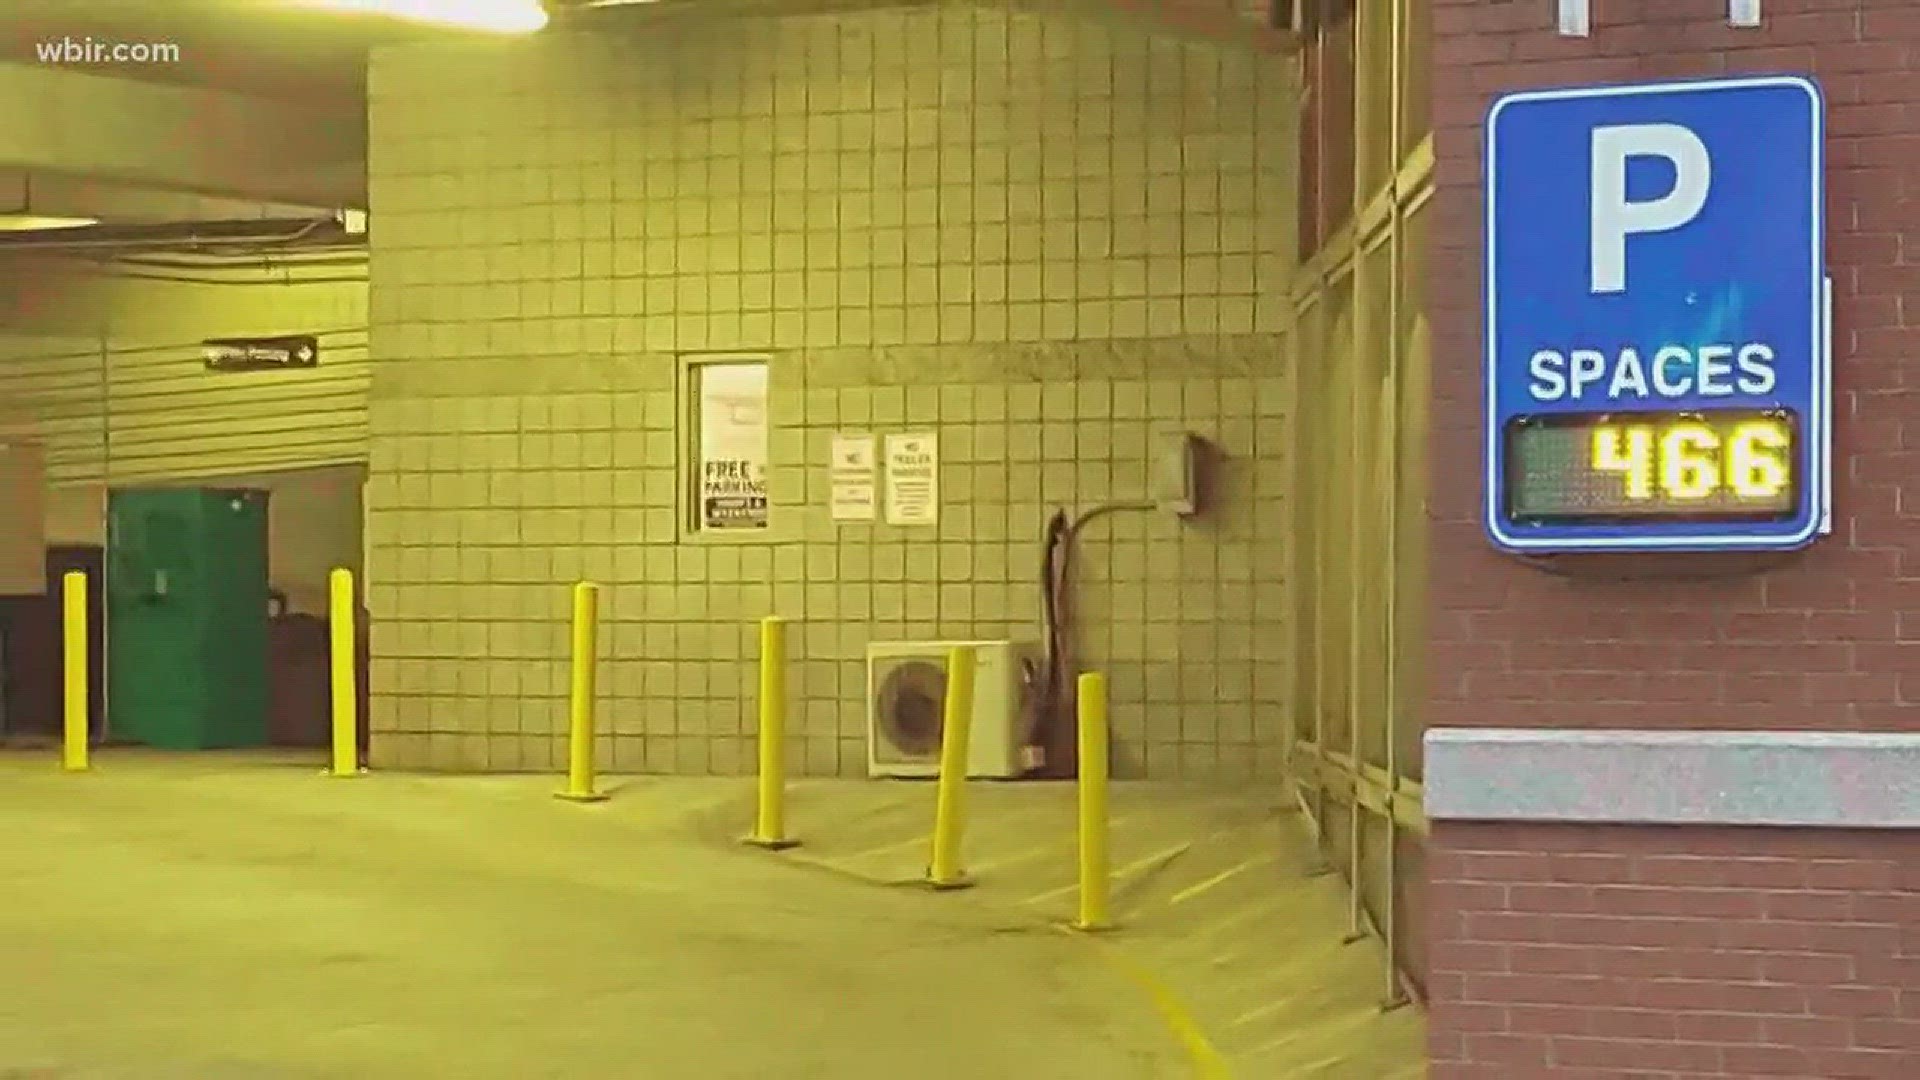 The city of Knoxville has added parking sensors to the Market Square Garage.